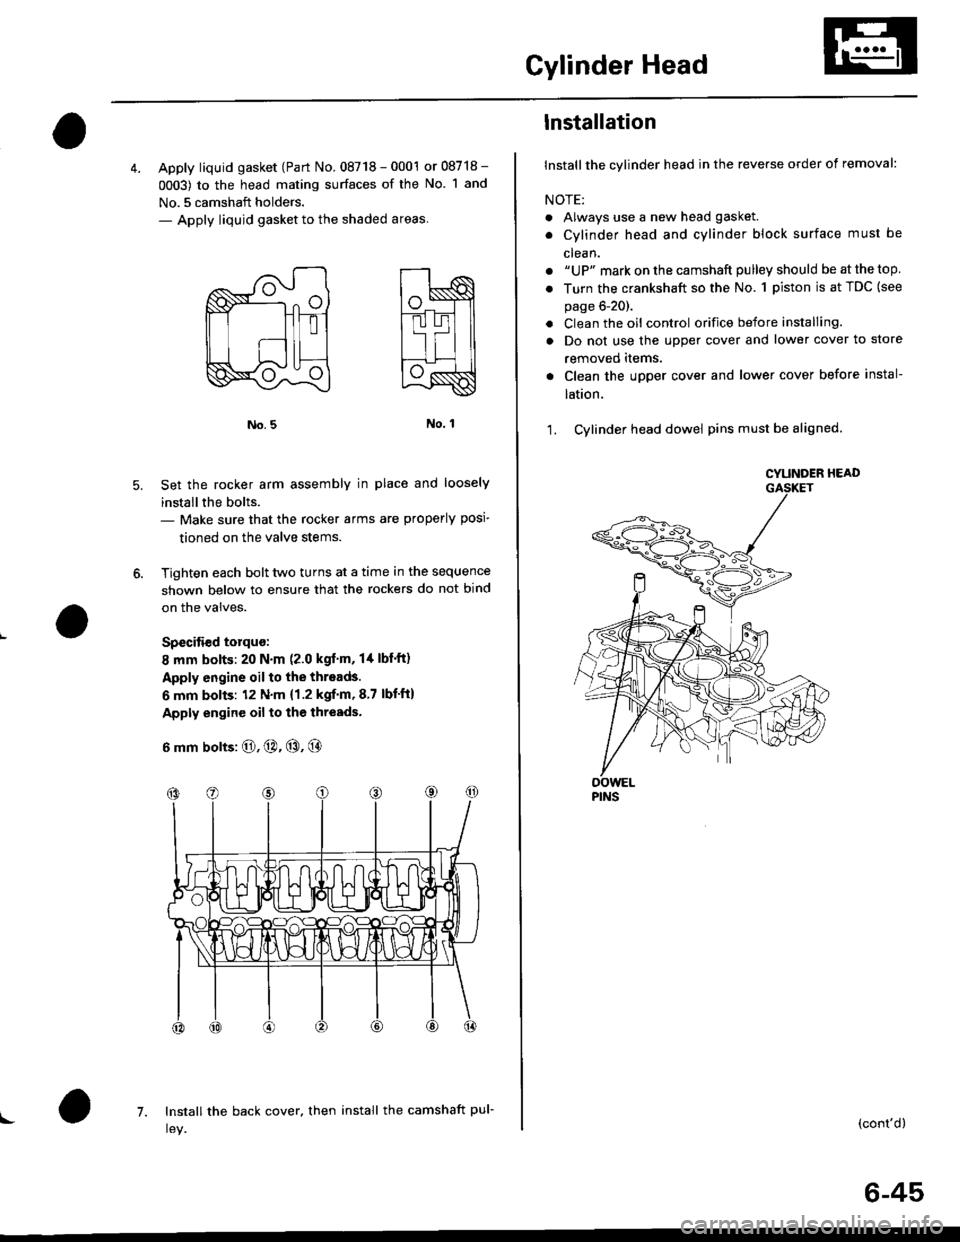 HONDA CIVIC 1998 6.G Workshop Manual Cylinder Head
4. Apply liquid gasket (Part No. 08718 - 0001 or 08718 -
0003) to the head mating surfaces of the No. 1 and
No.5 camshaft holders.- Apply liquid gasket to the shaded areas
Set the rocker